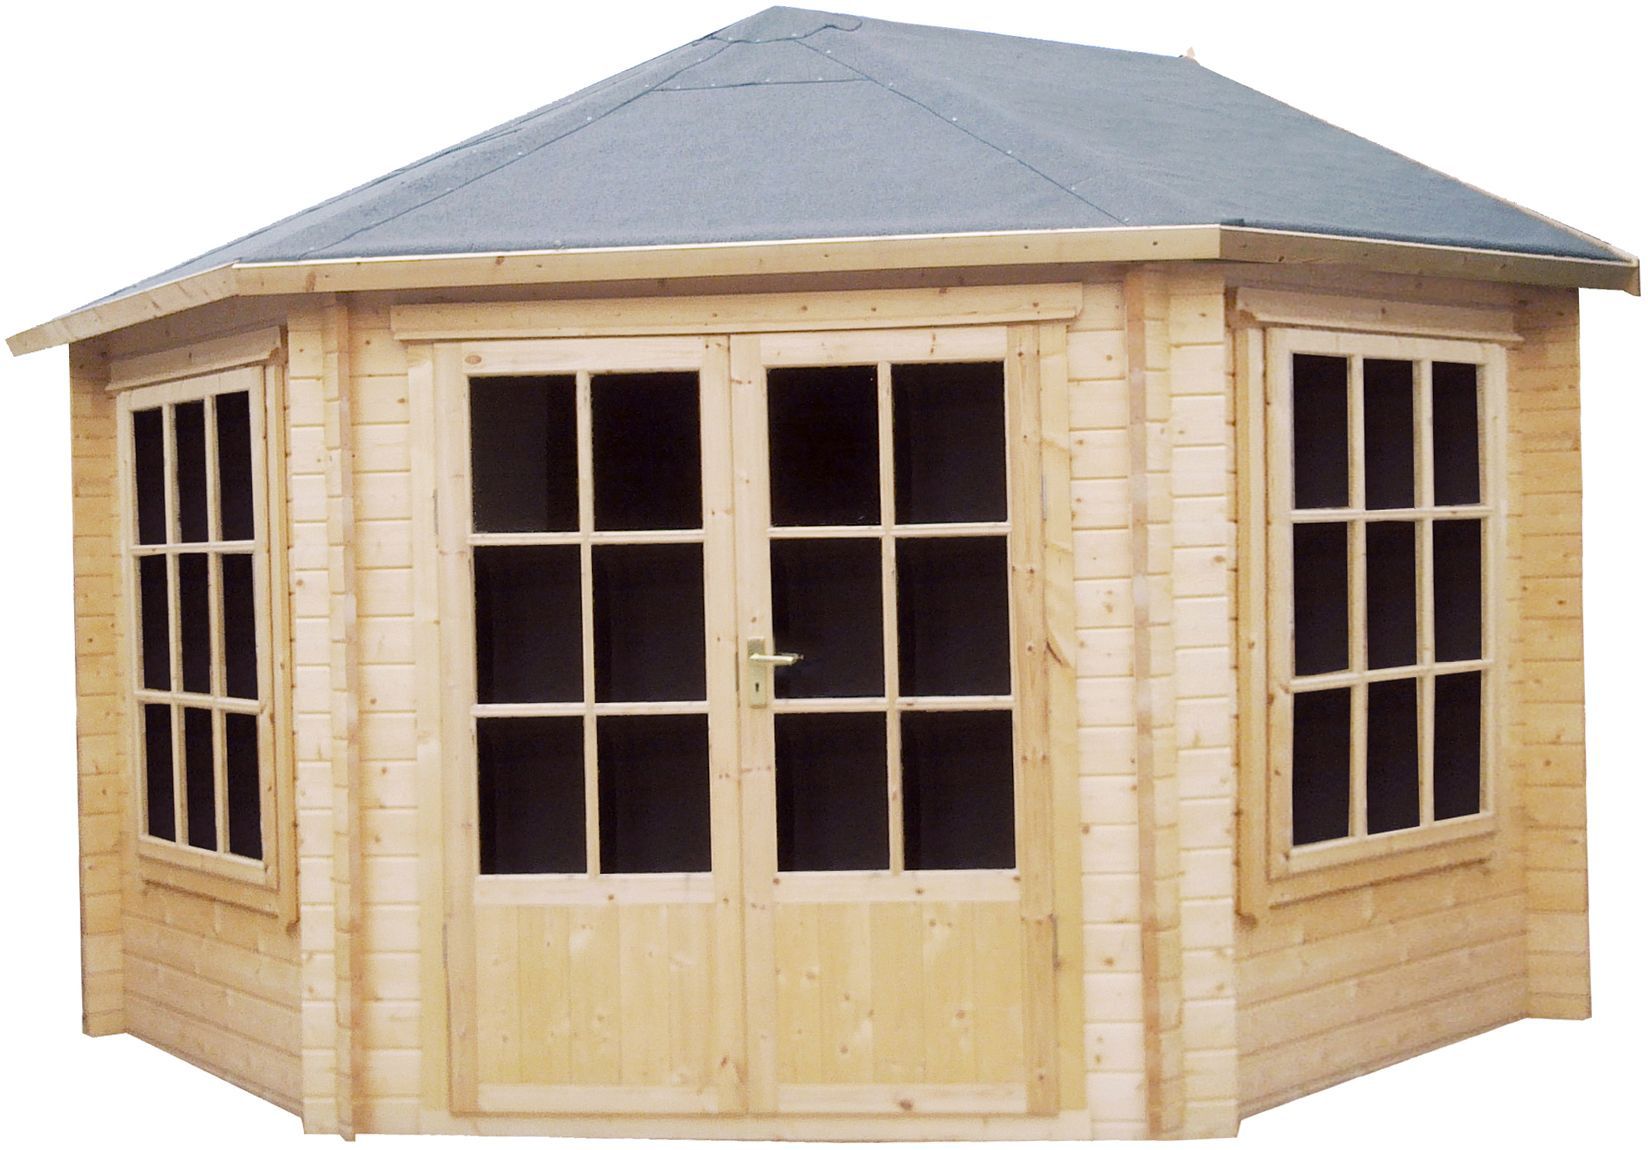 Shire Belvoir 10x10 ft & 2 windows Apex Wooden Cabin - Assembly service included